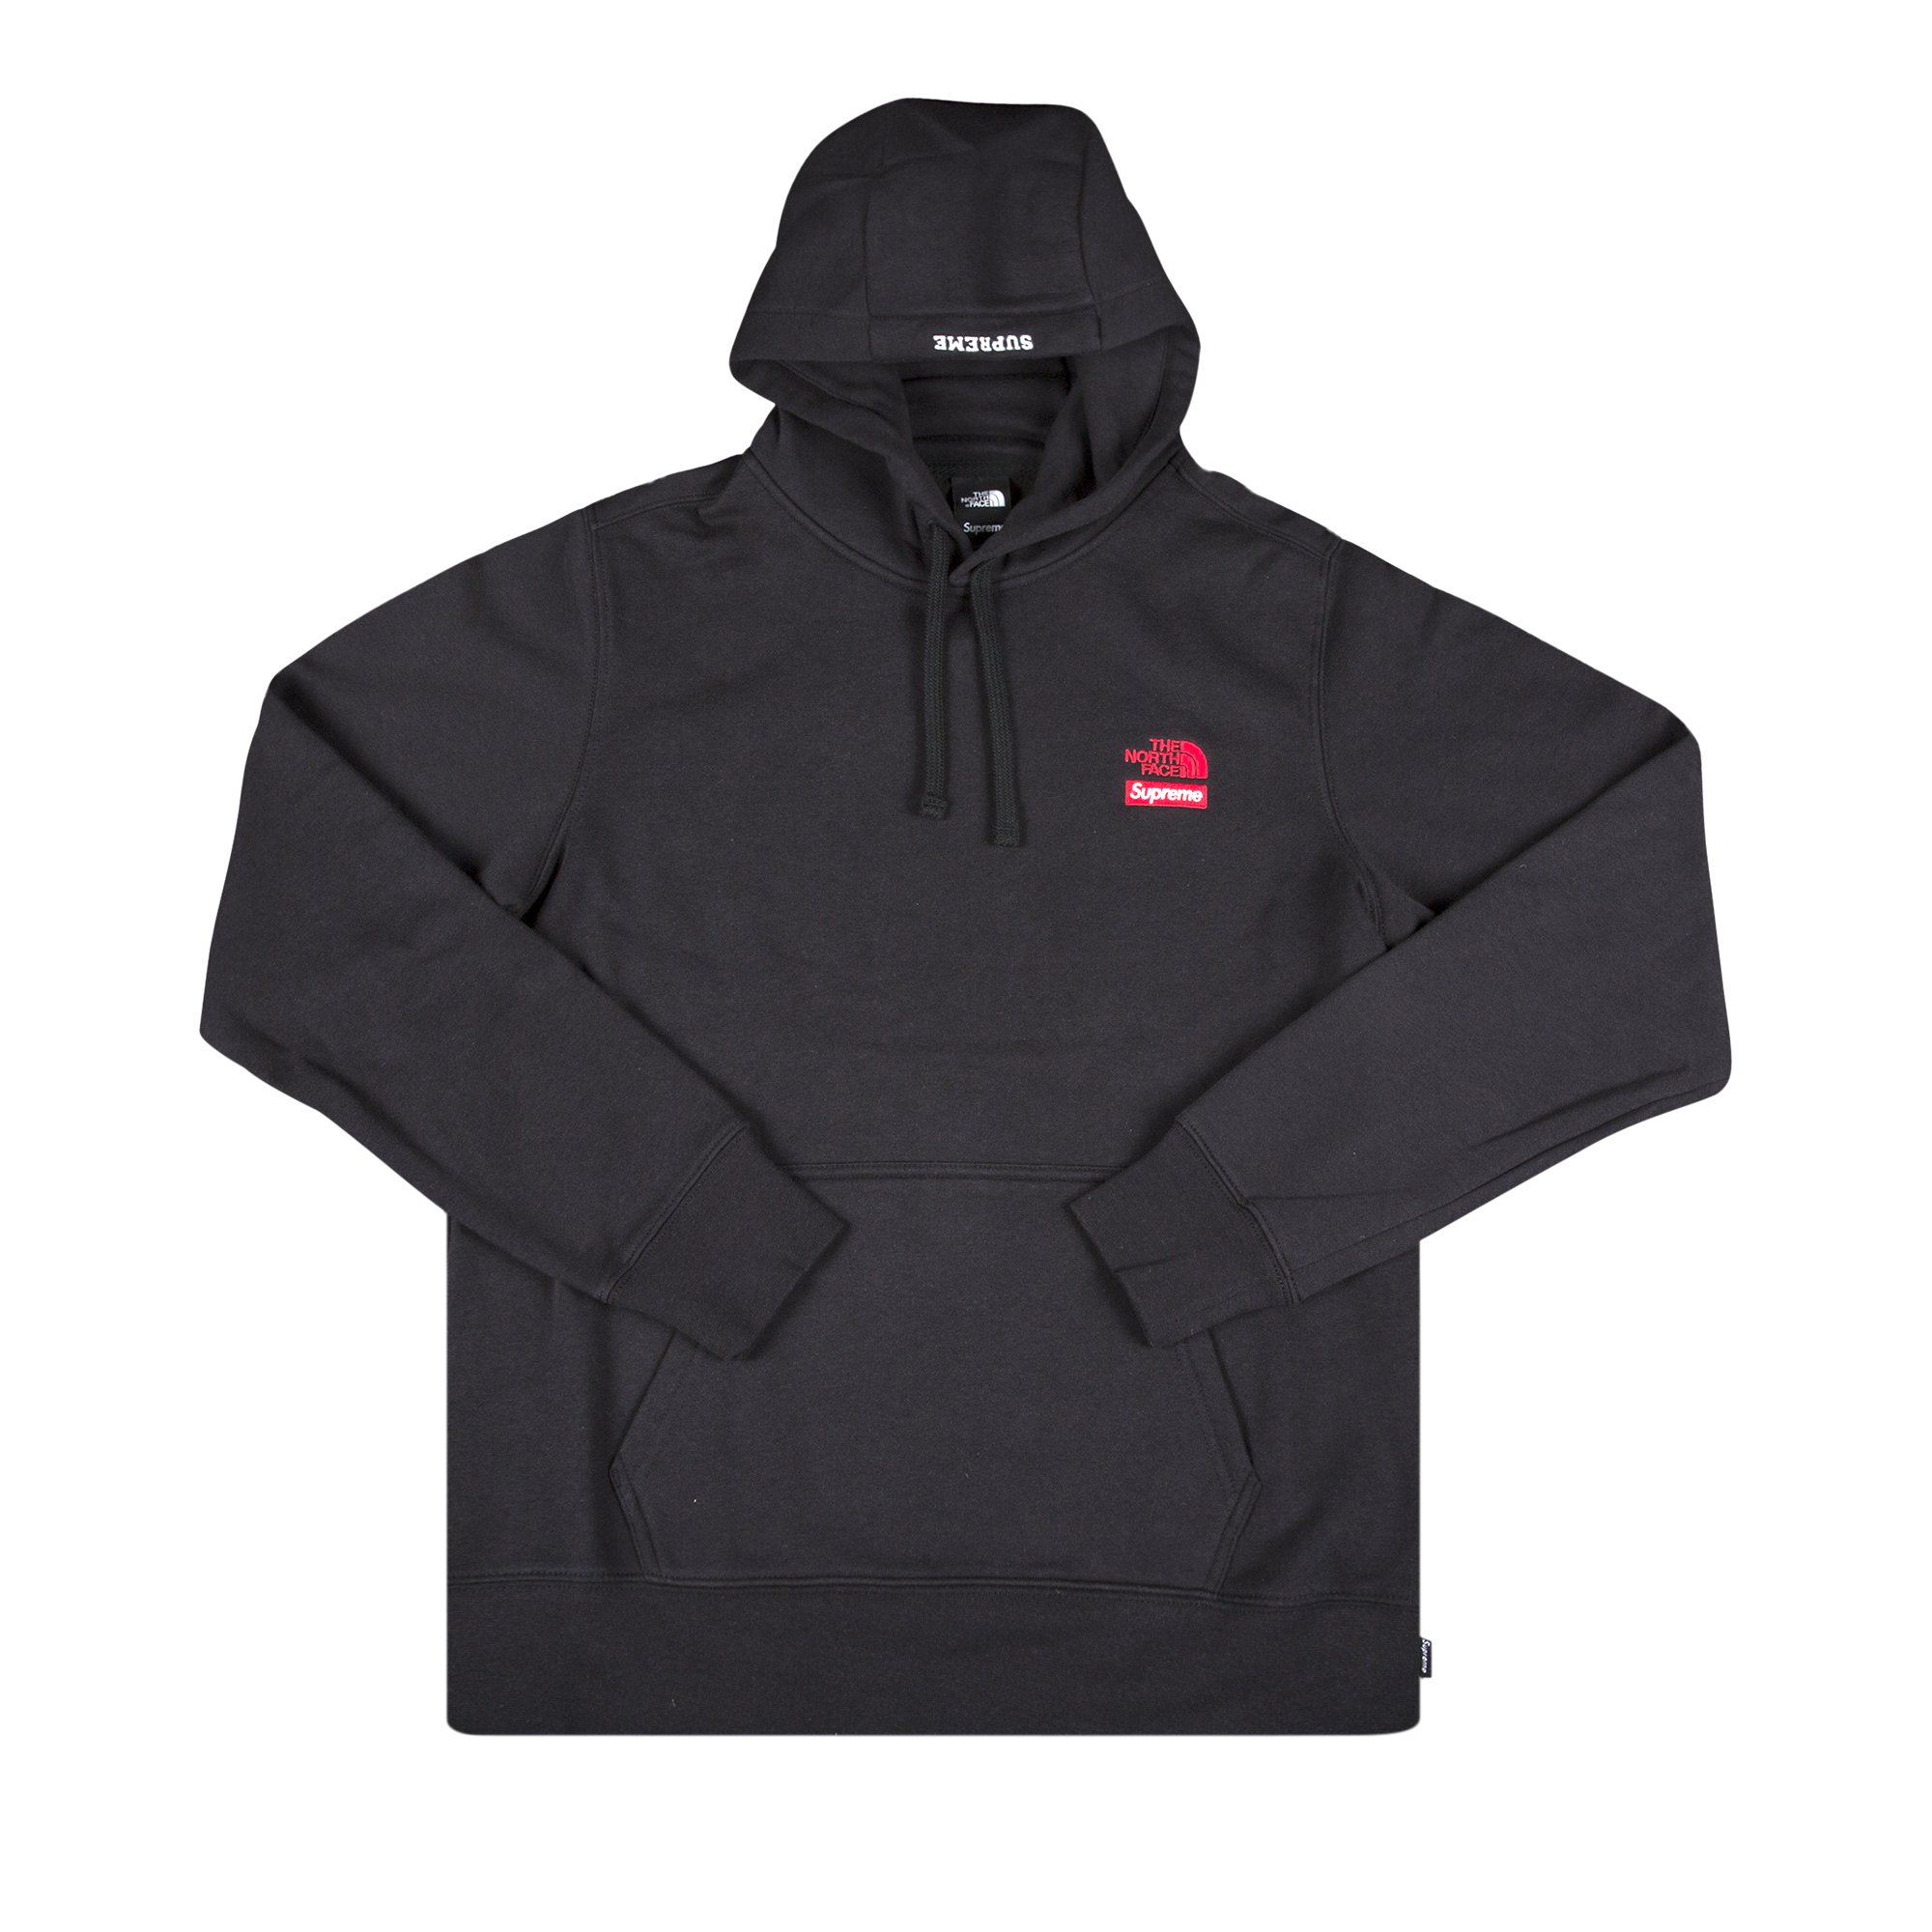 Supreme North Face Hooded Sweatshirt - thepolicytimes.com